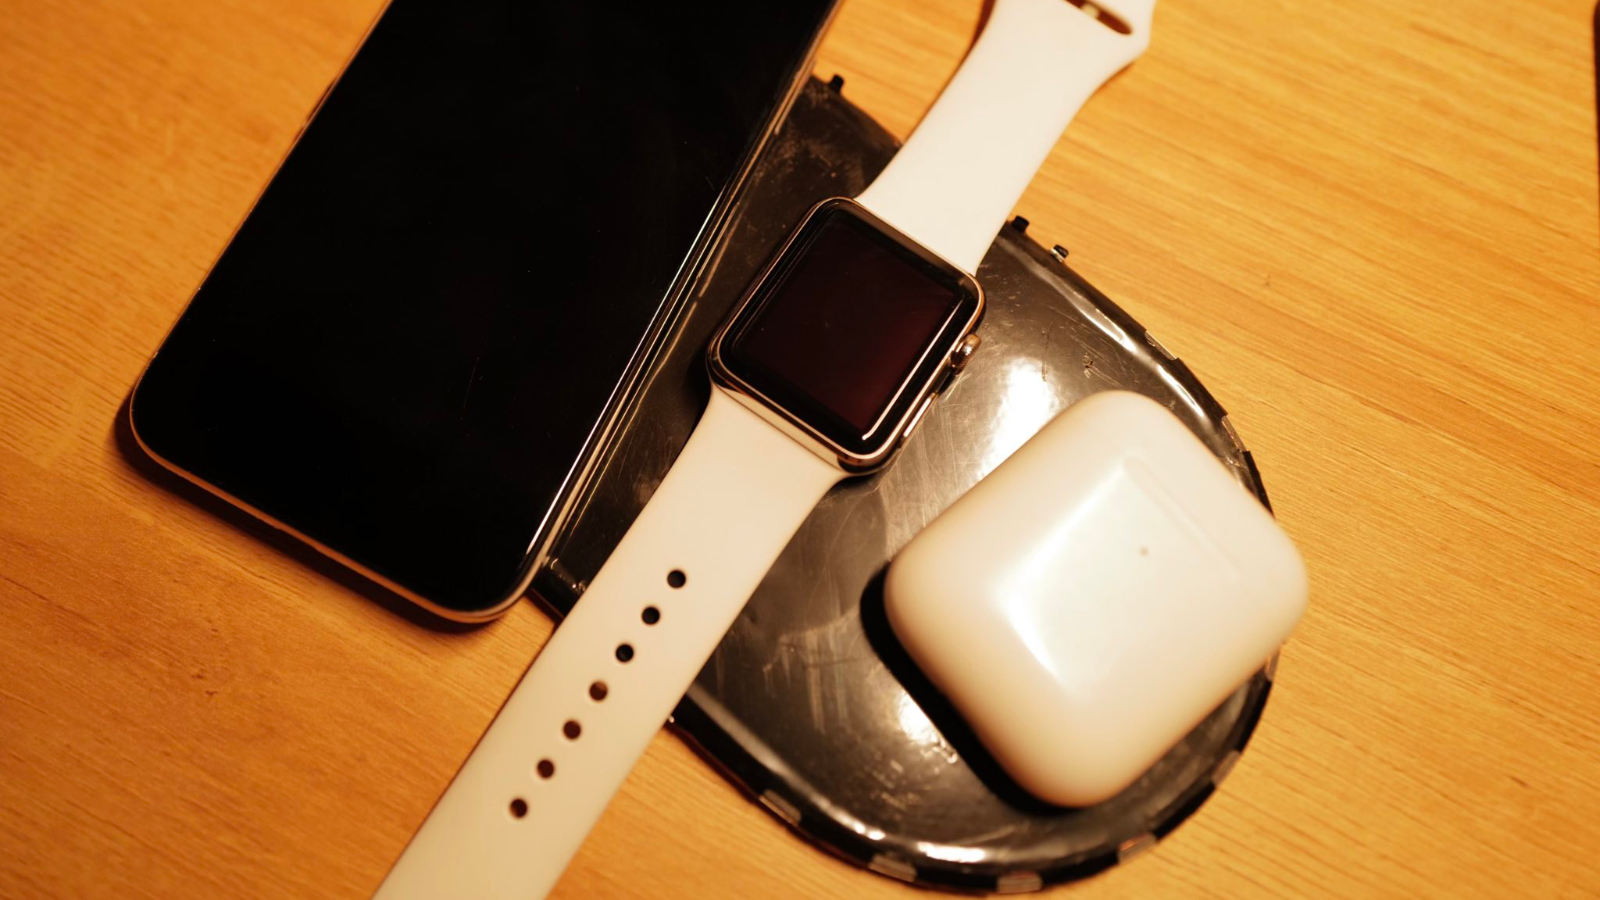 Whatever Happened To Apple's AirPower Wireless Charger?